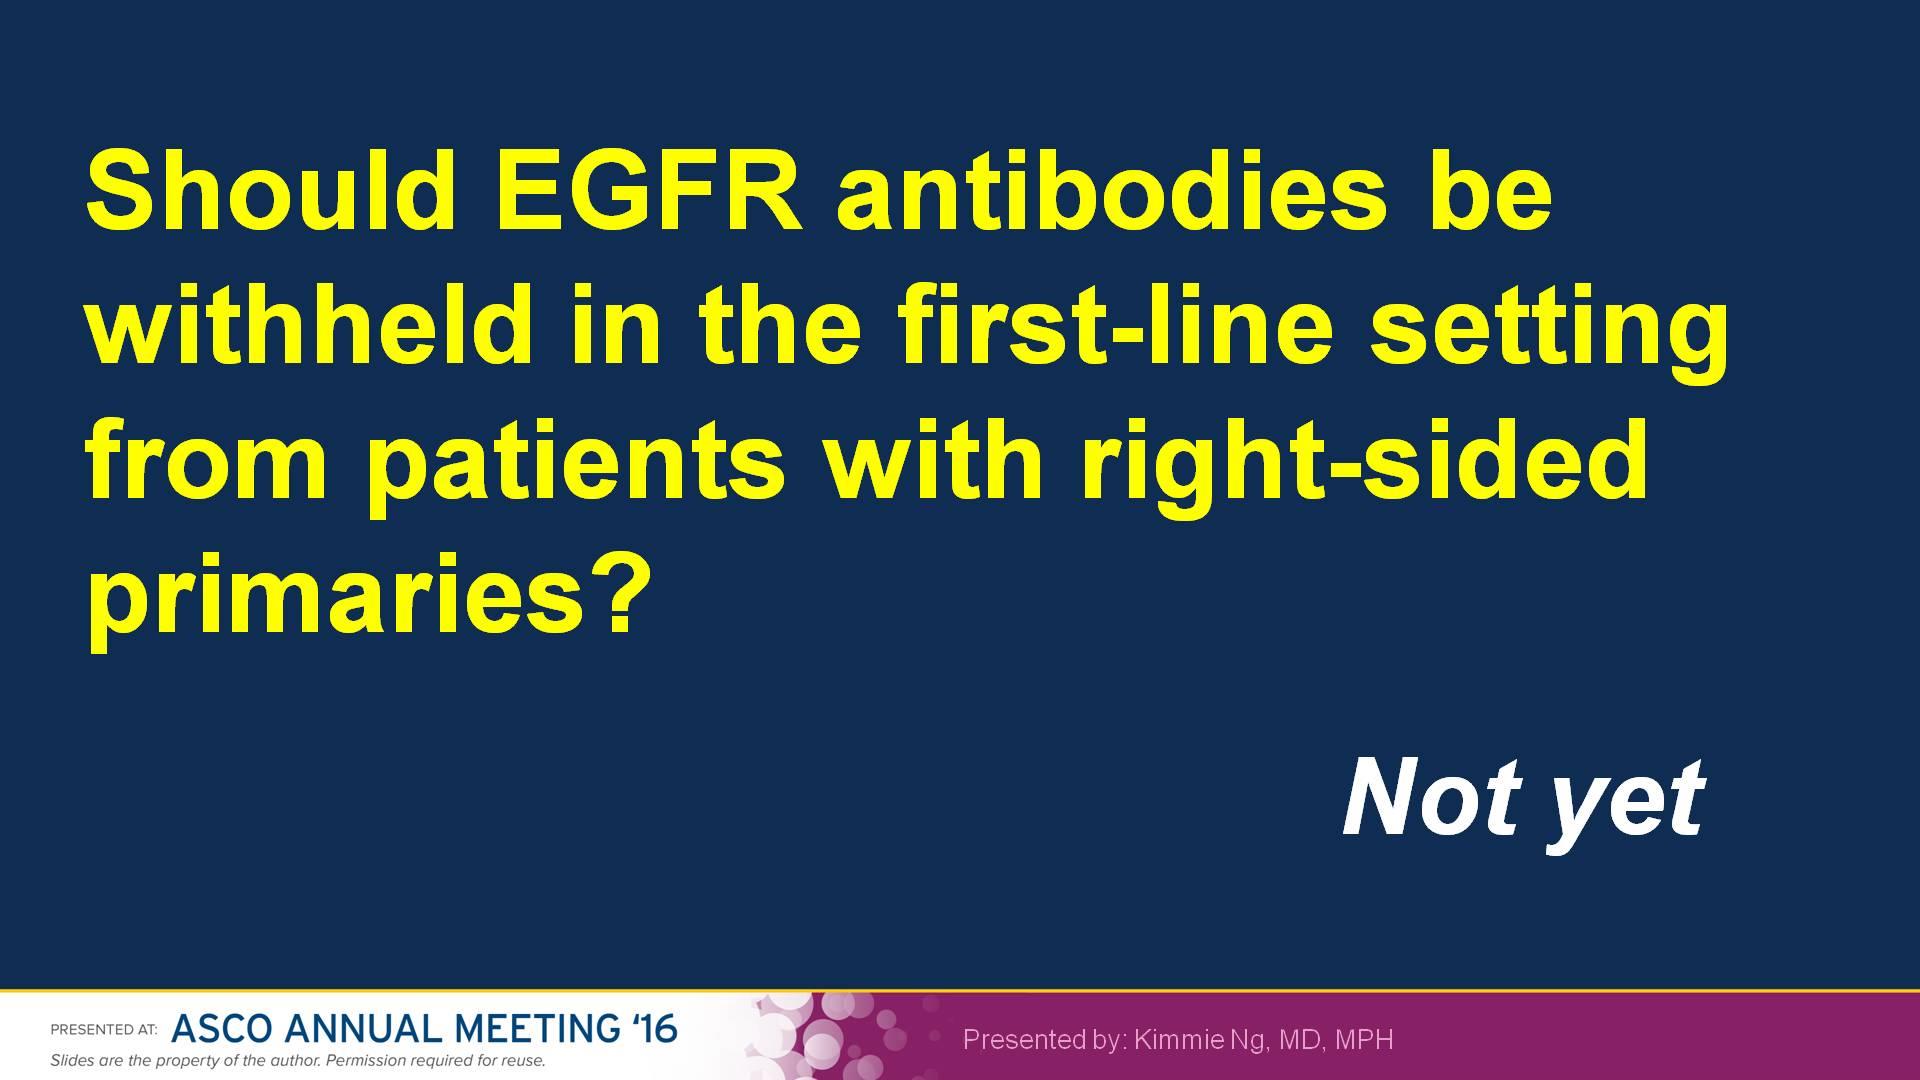 Should EGFR antibodies be withheld in